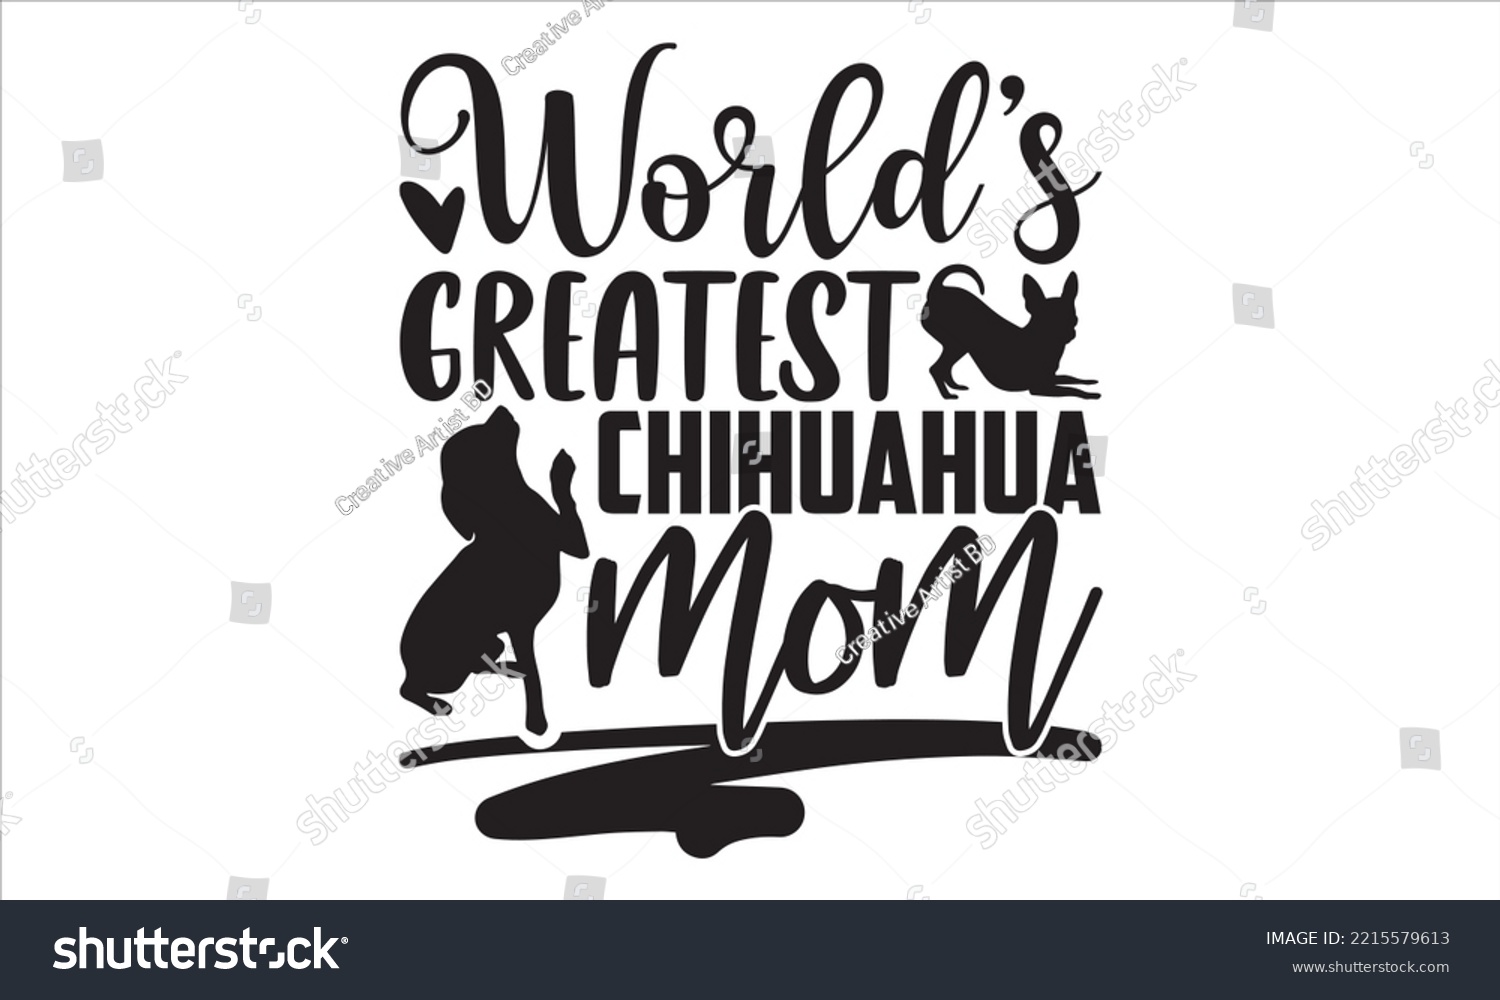 SVG of World’s Greatest Chihuahua Mom - Chihuahua T shirt Design, Hand drawn vintage illustration with hand-lettering and decoration elements, Cut Files for Cricut Svg, Digital Download svg